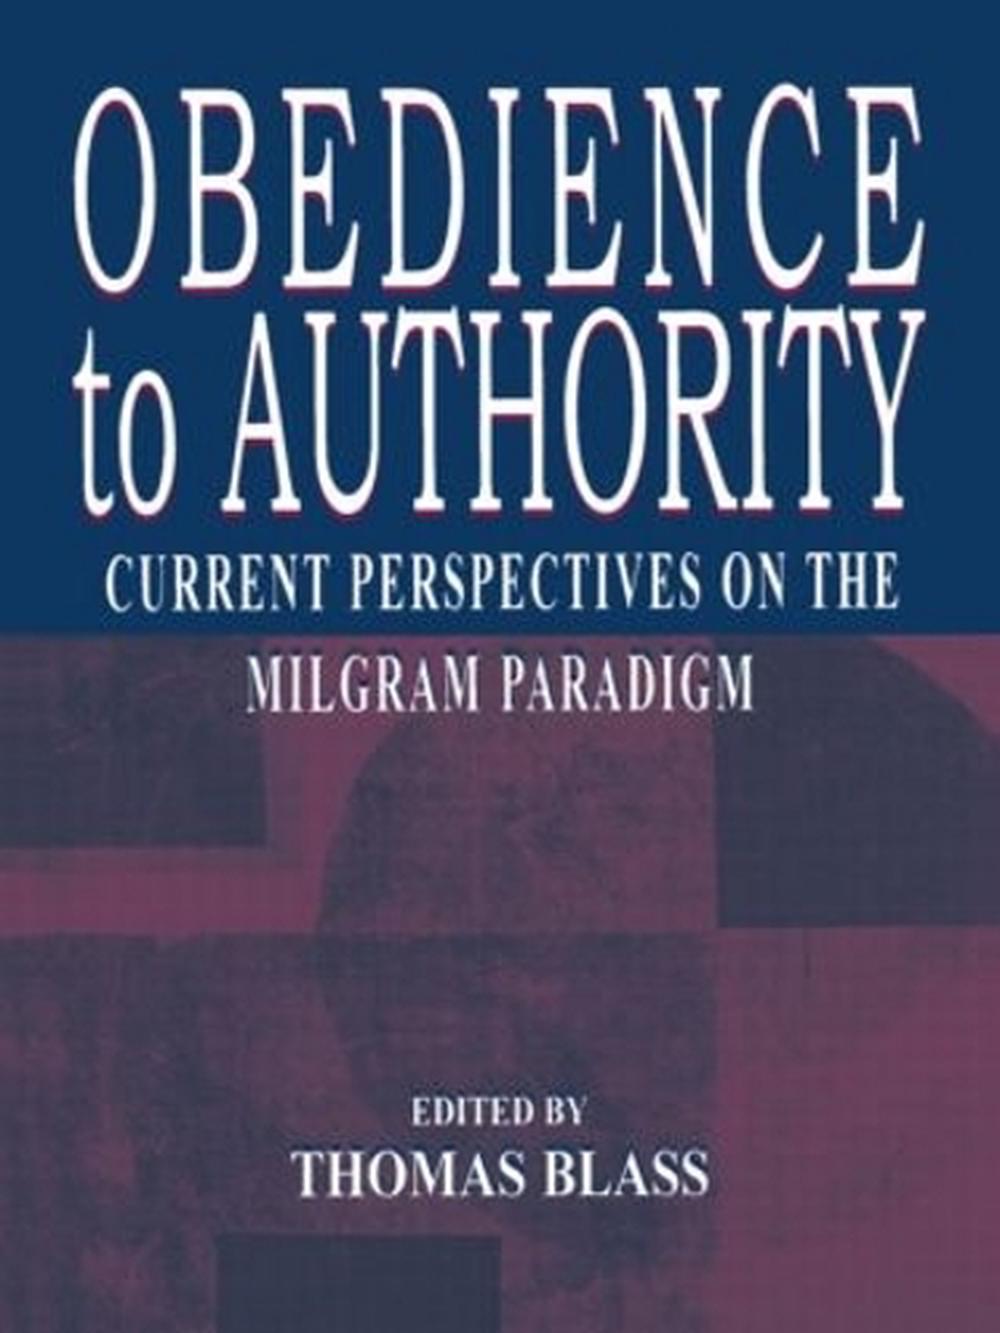 Obedience to Authority Current Perspectives on the Milgram Paradigm (English) P 9780805839340